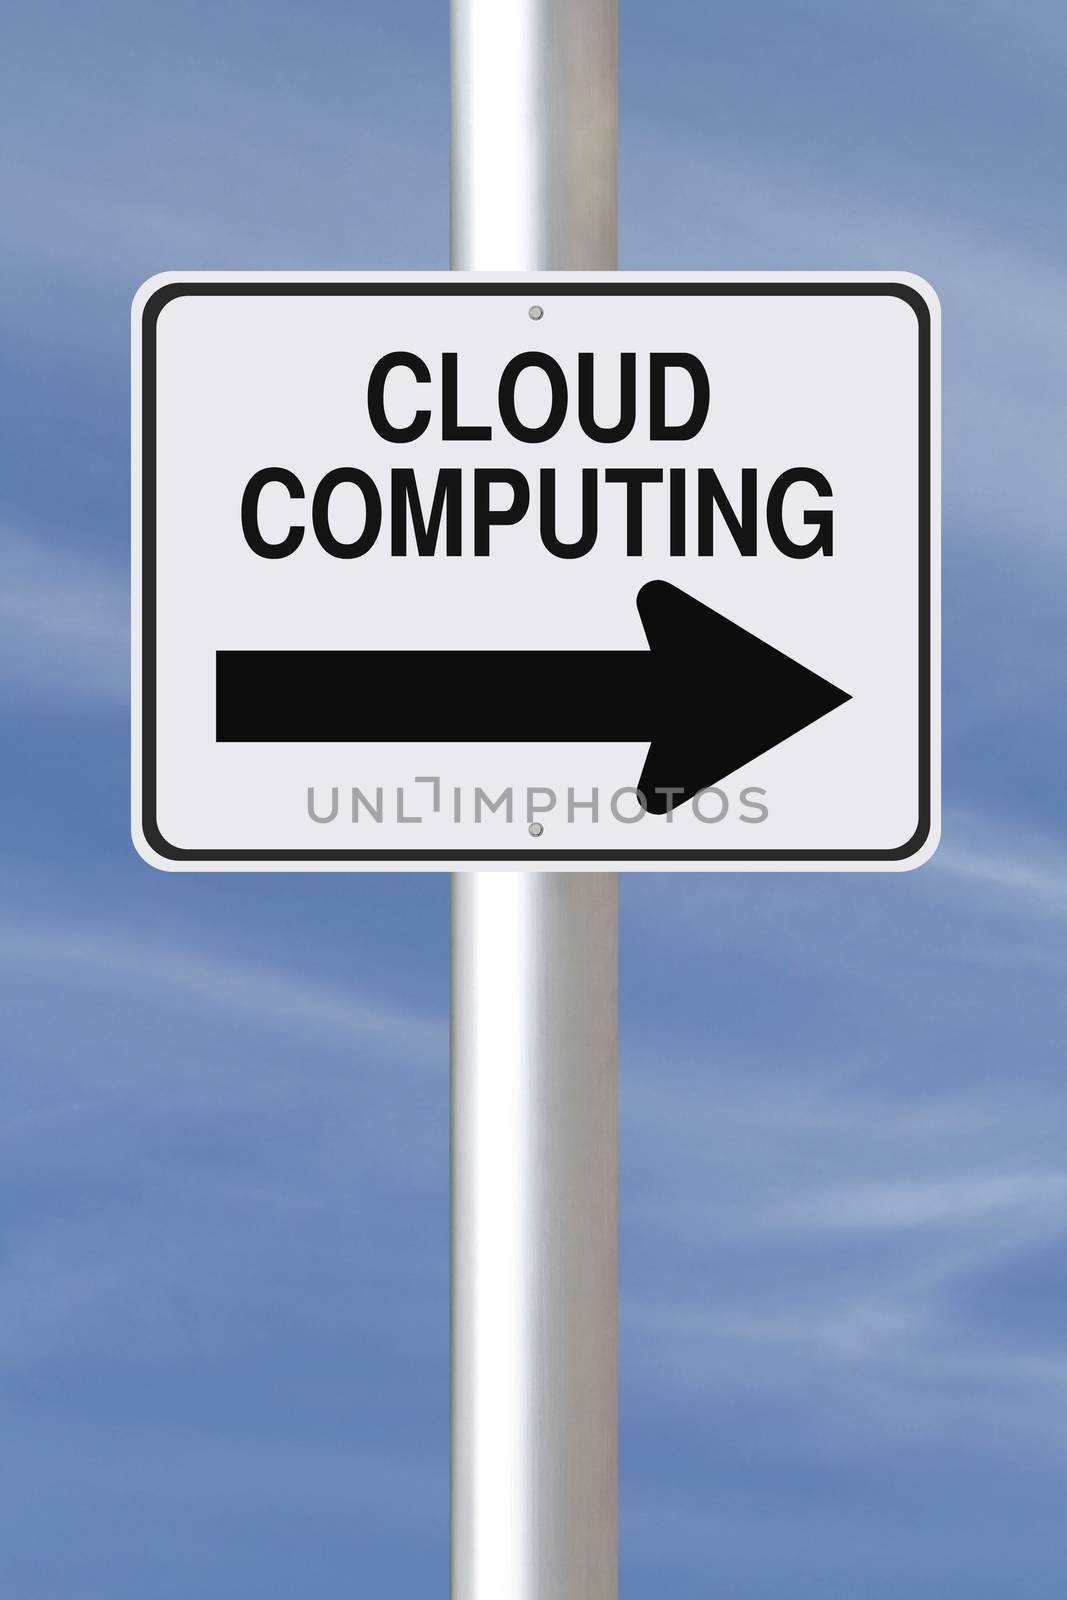 A modified one way street sign on the concept of Cloud Computing